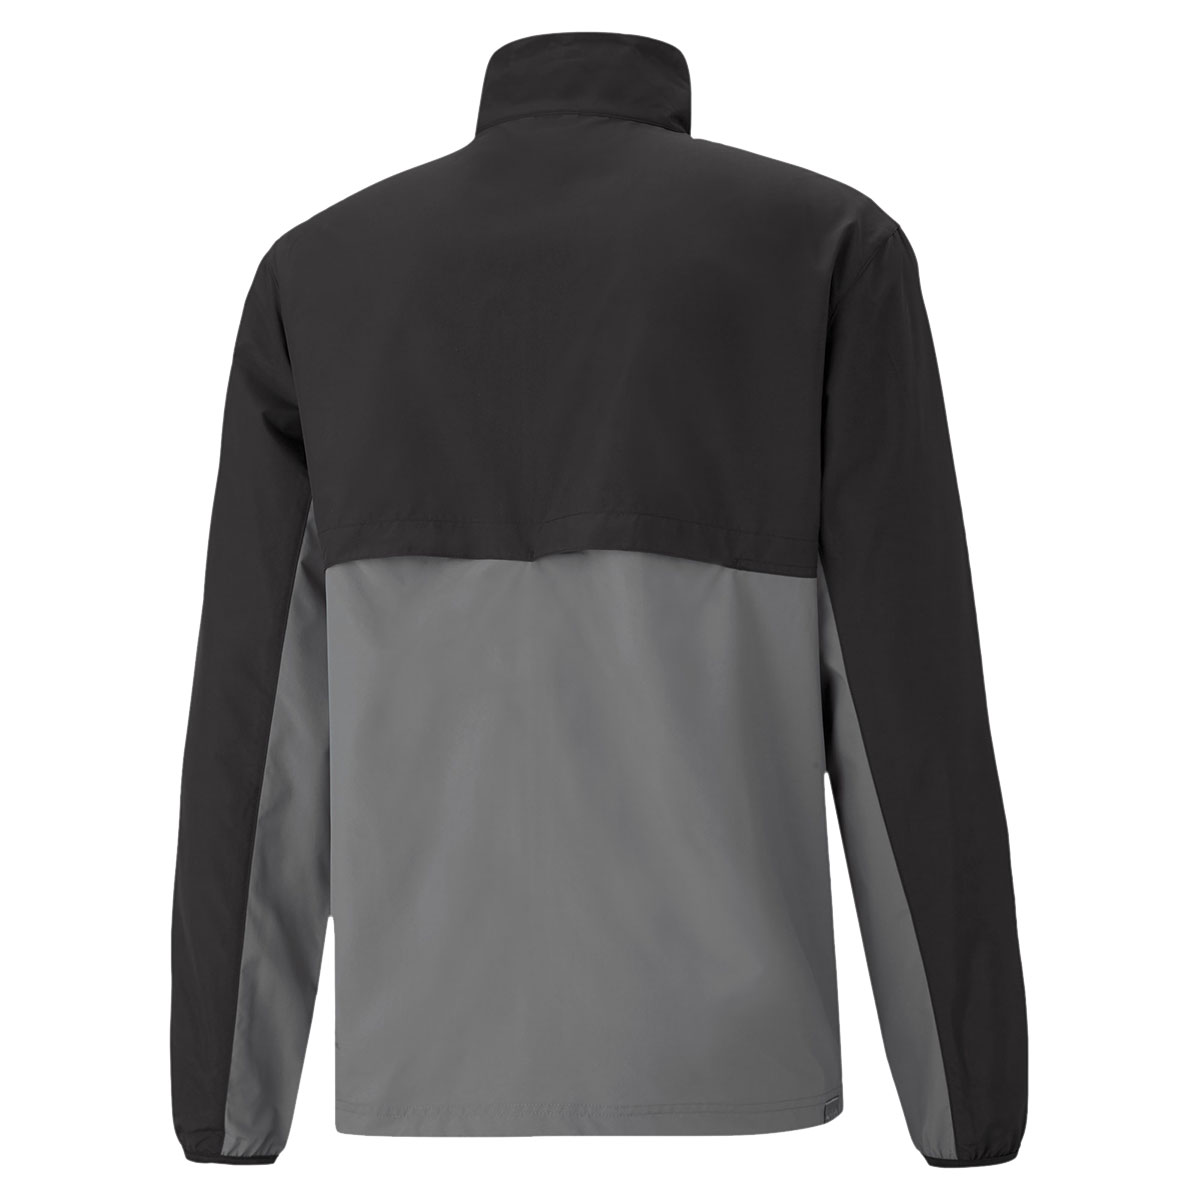 PUMA Men's x First Mile Golf Wind Jacket from american golf